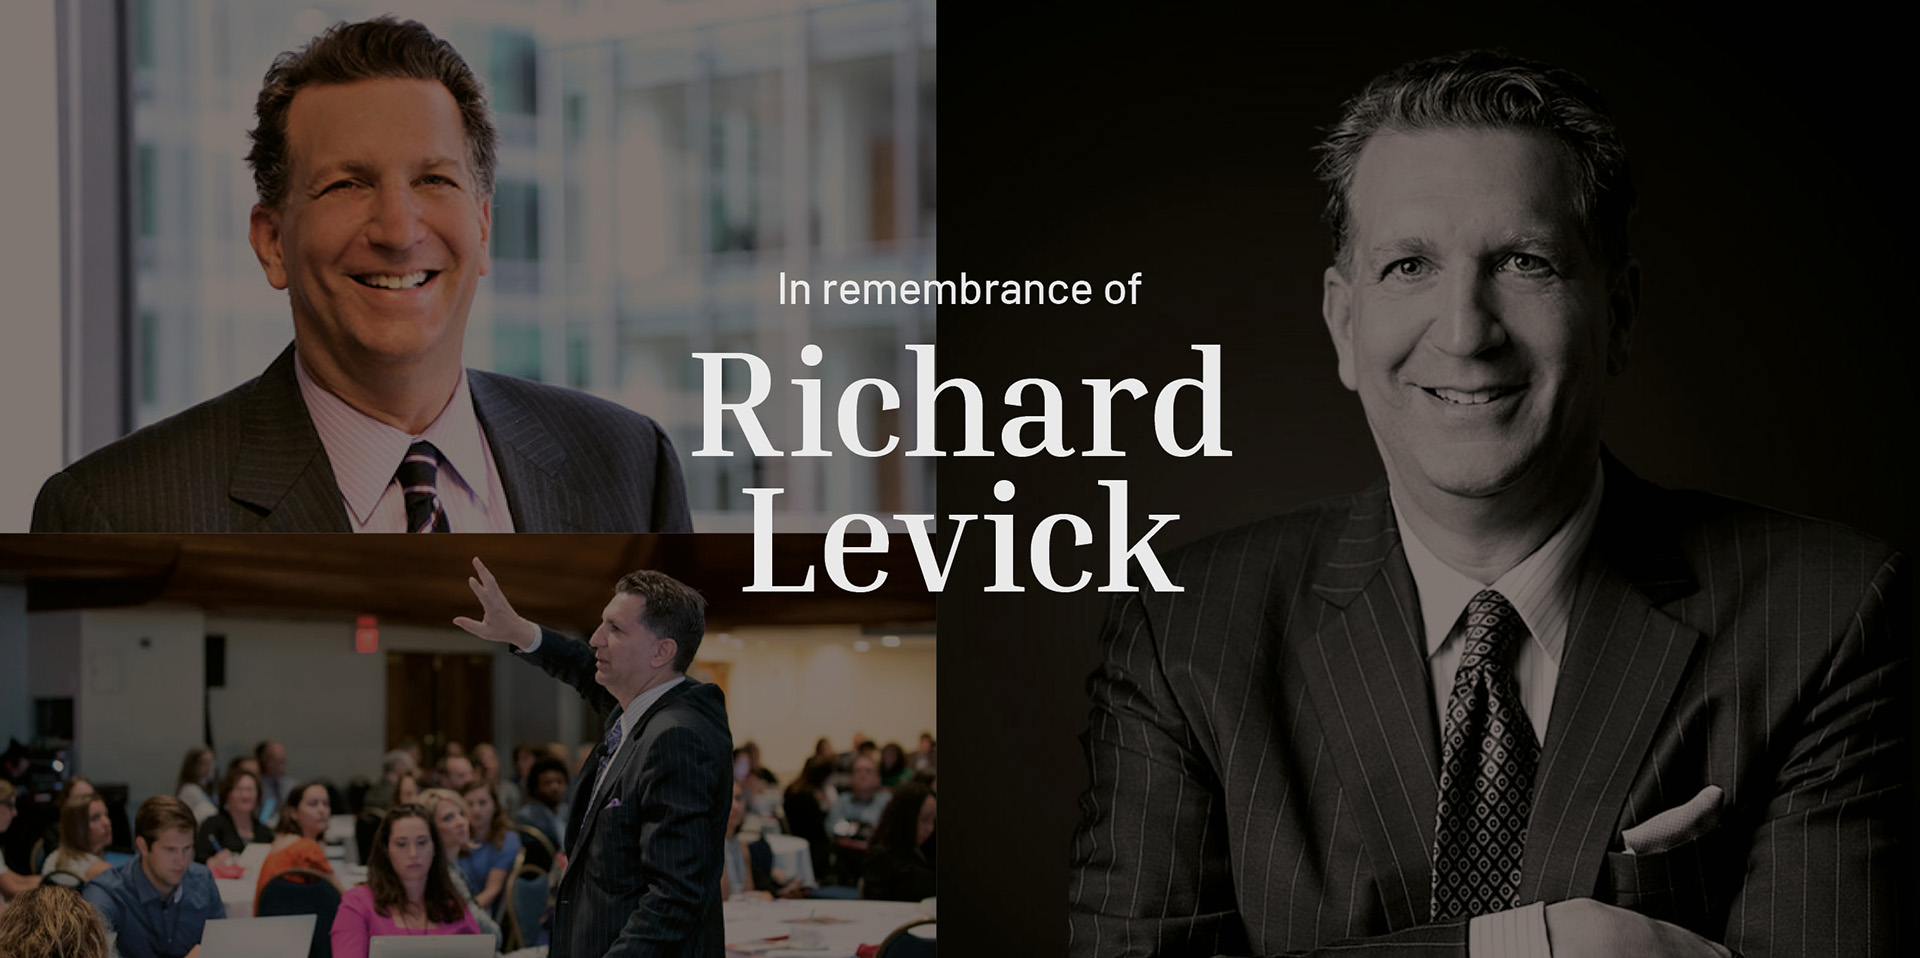 In remembrance of Richard Levick